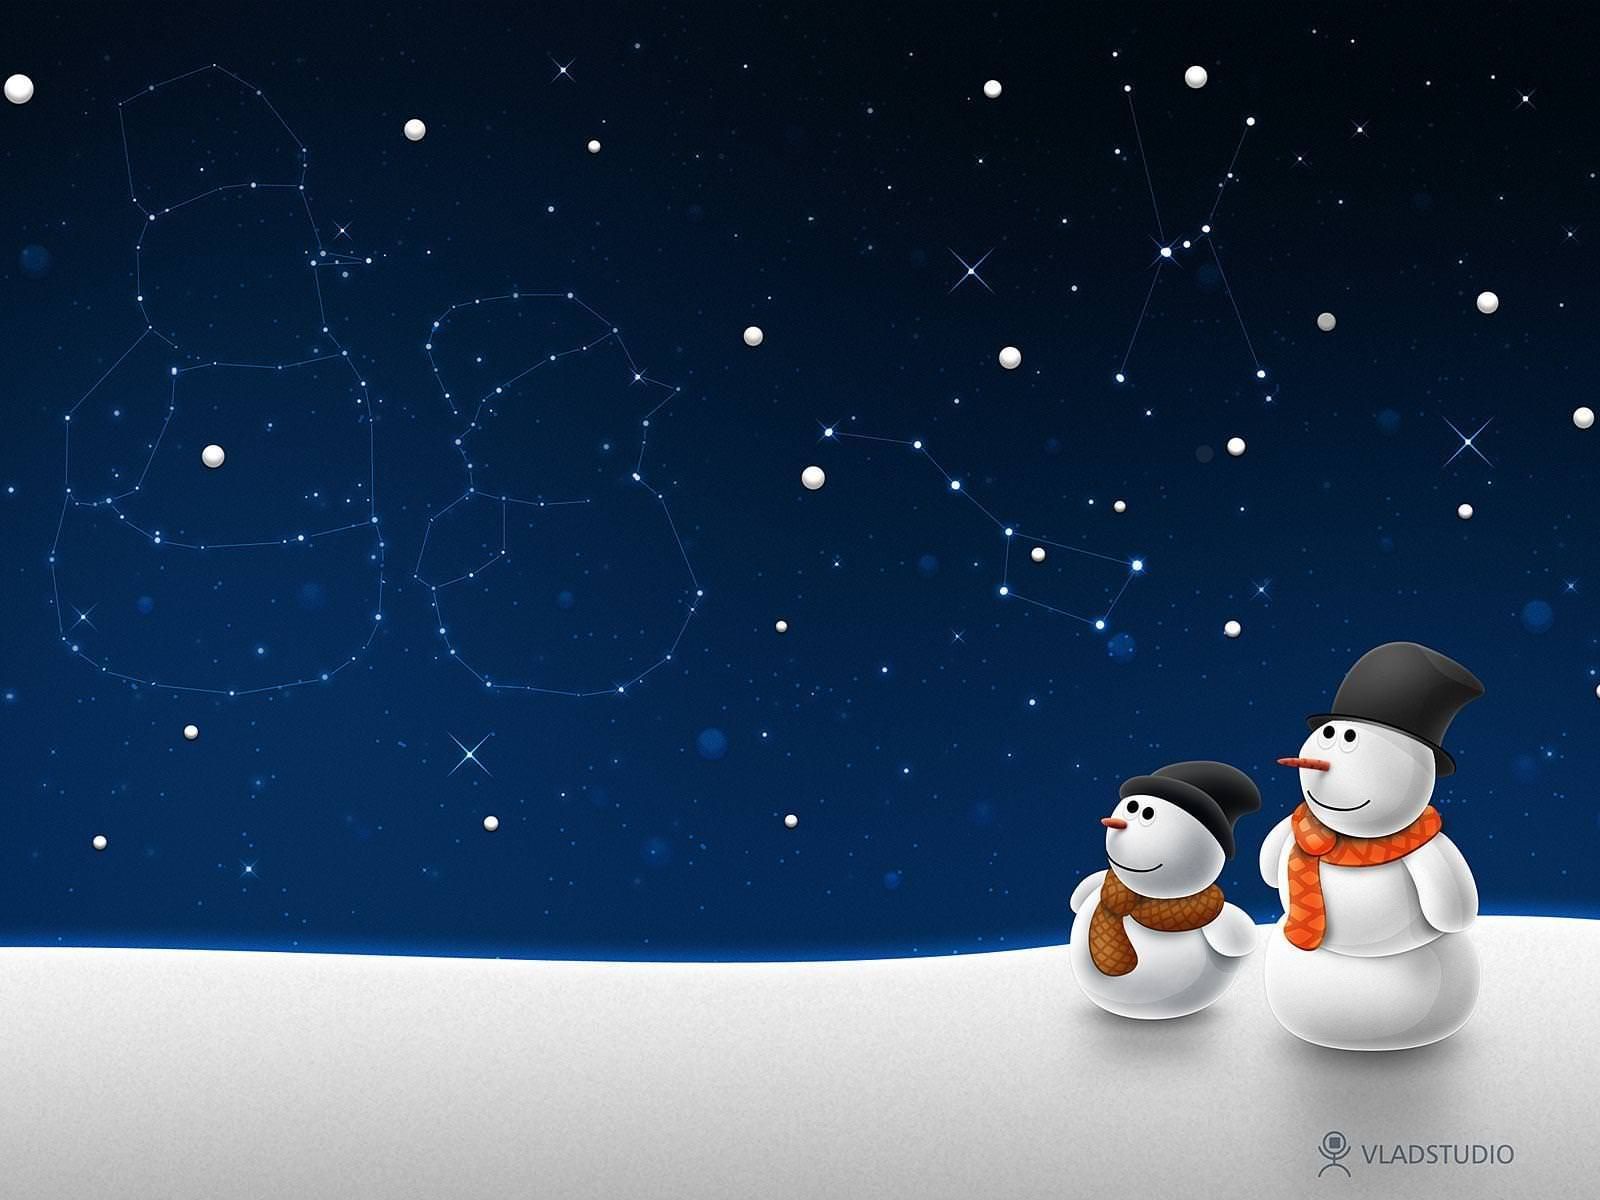 Snowman Wallpaper Free Christmas Background For Powerpoint